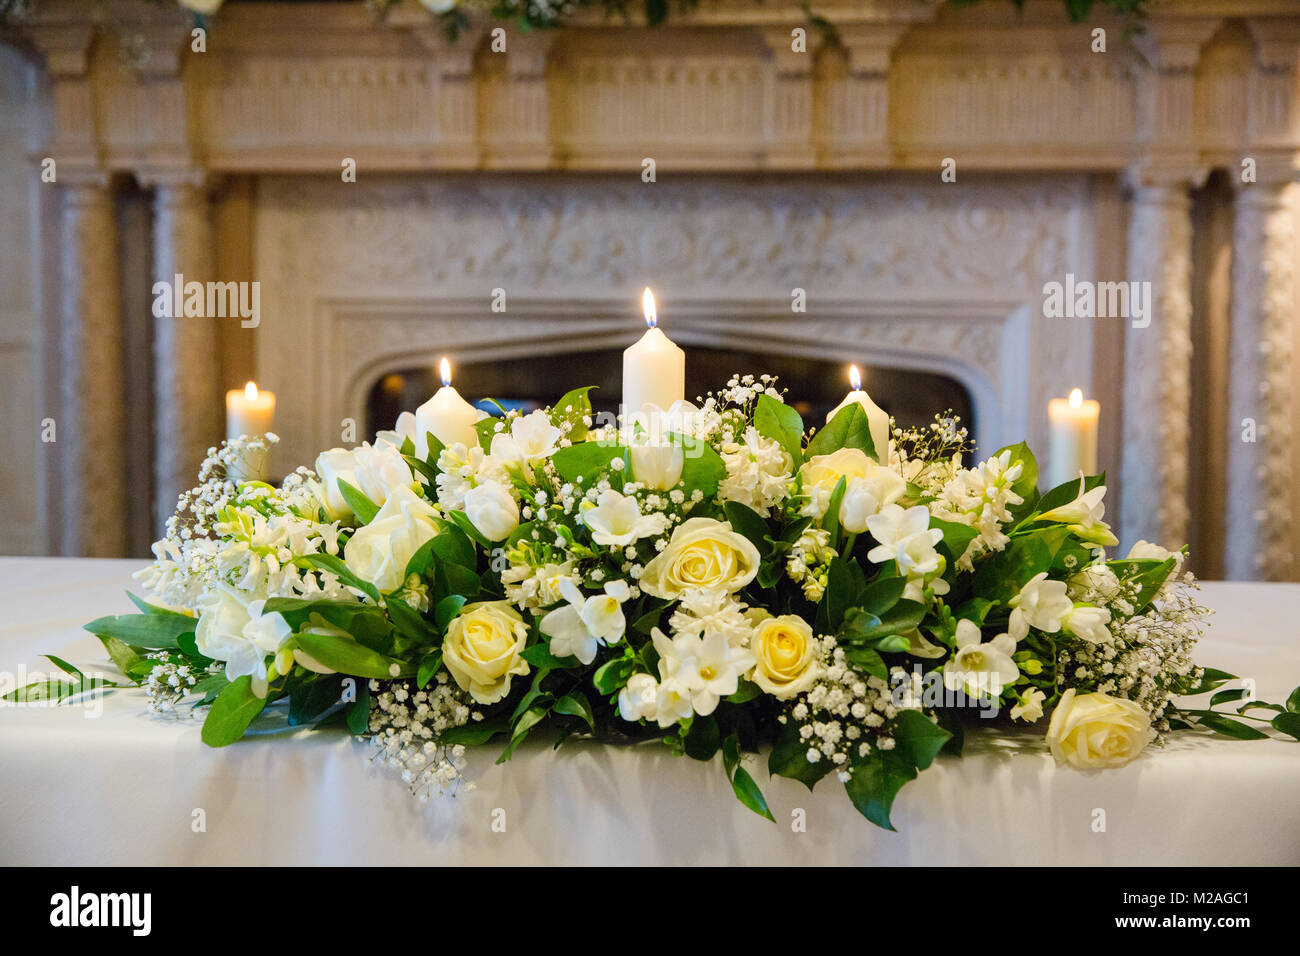 Cream floral arrangement with lit candles on wedding reception table Stock Photo